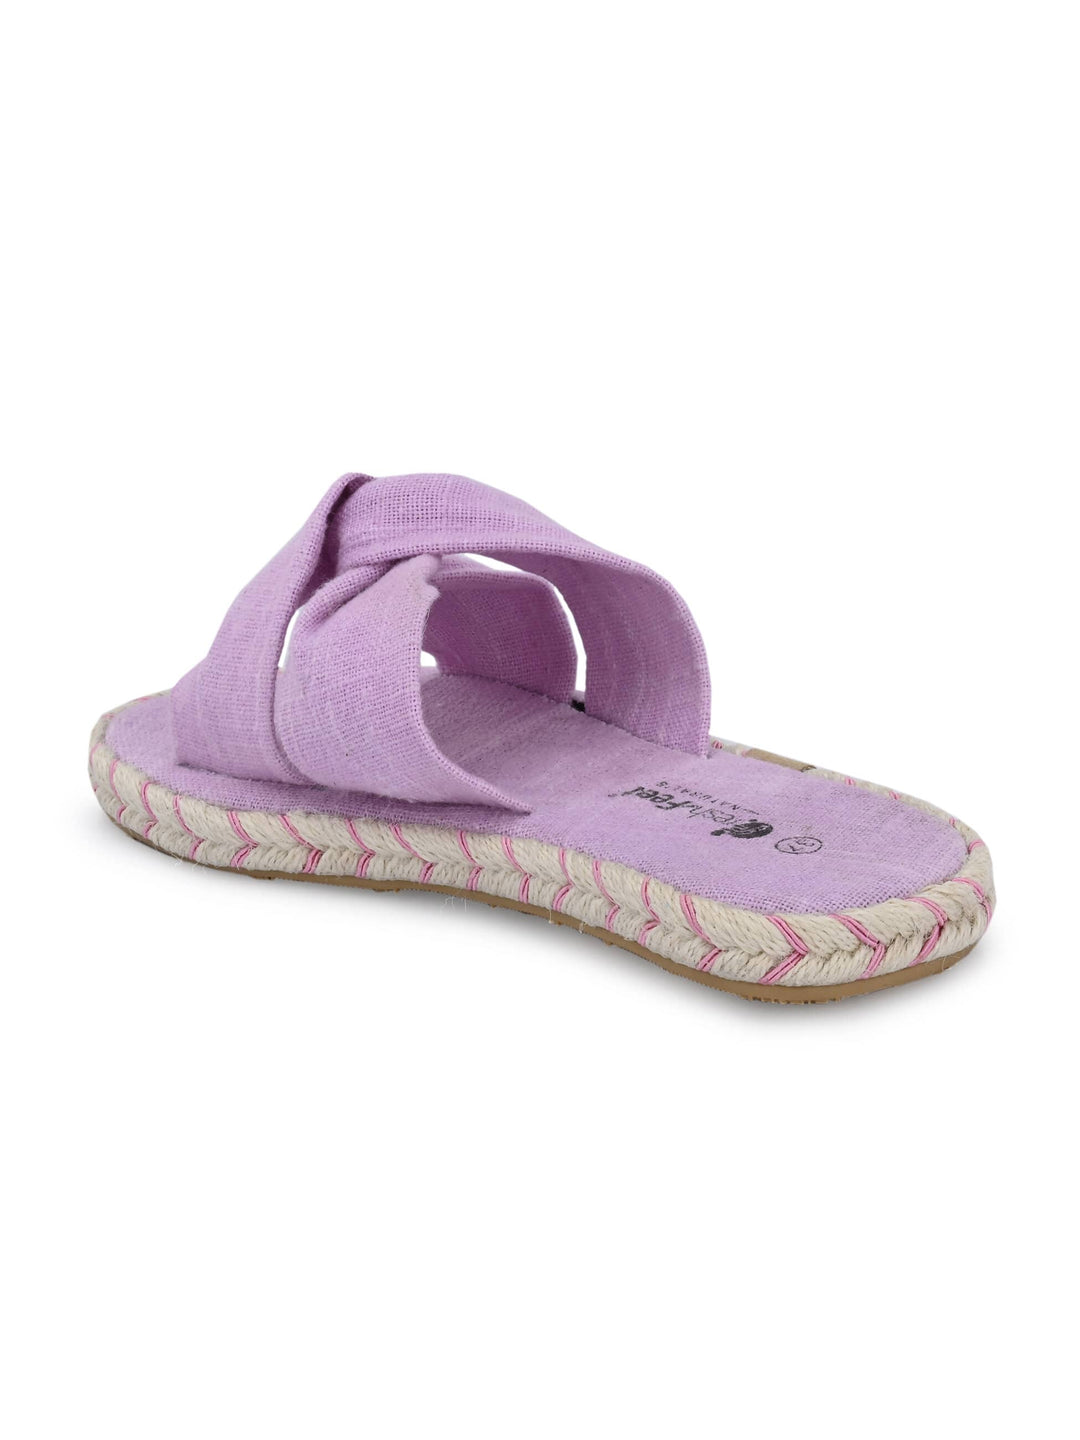 Diana Brushed Purple Sandals for Women